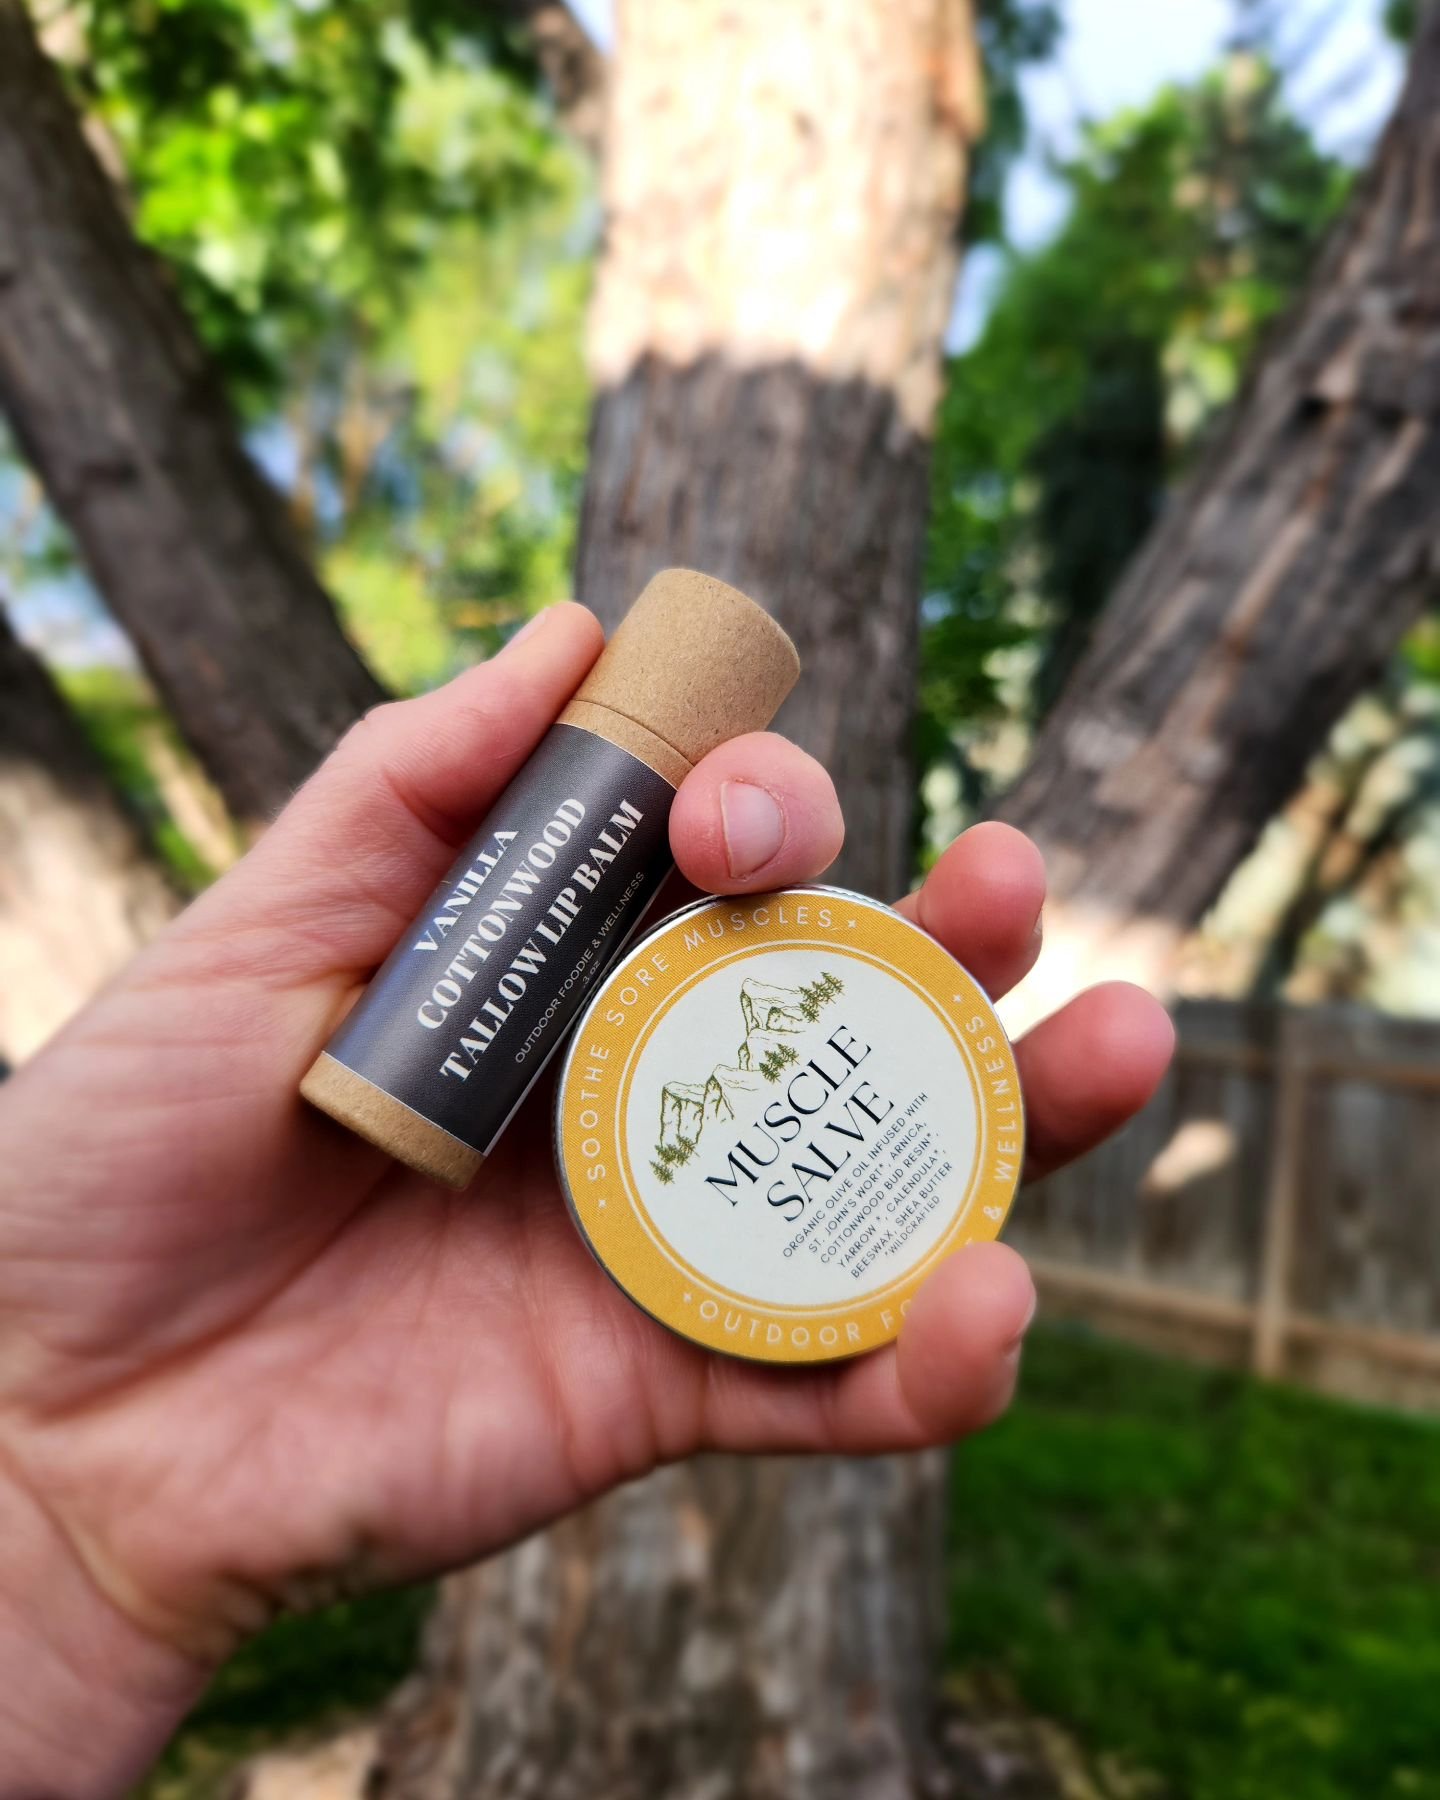 Muscle salve &amp; Vanilla Cottonwood Tallow Lip Balms for your backpack! (Yepp yes!! I make these!!)

Backpacking season is around the corner, and these two are essentials in my pack.

Muscle salve to help soothe those tired leggies, bruises. . A su